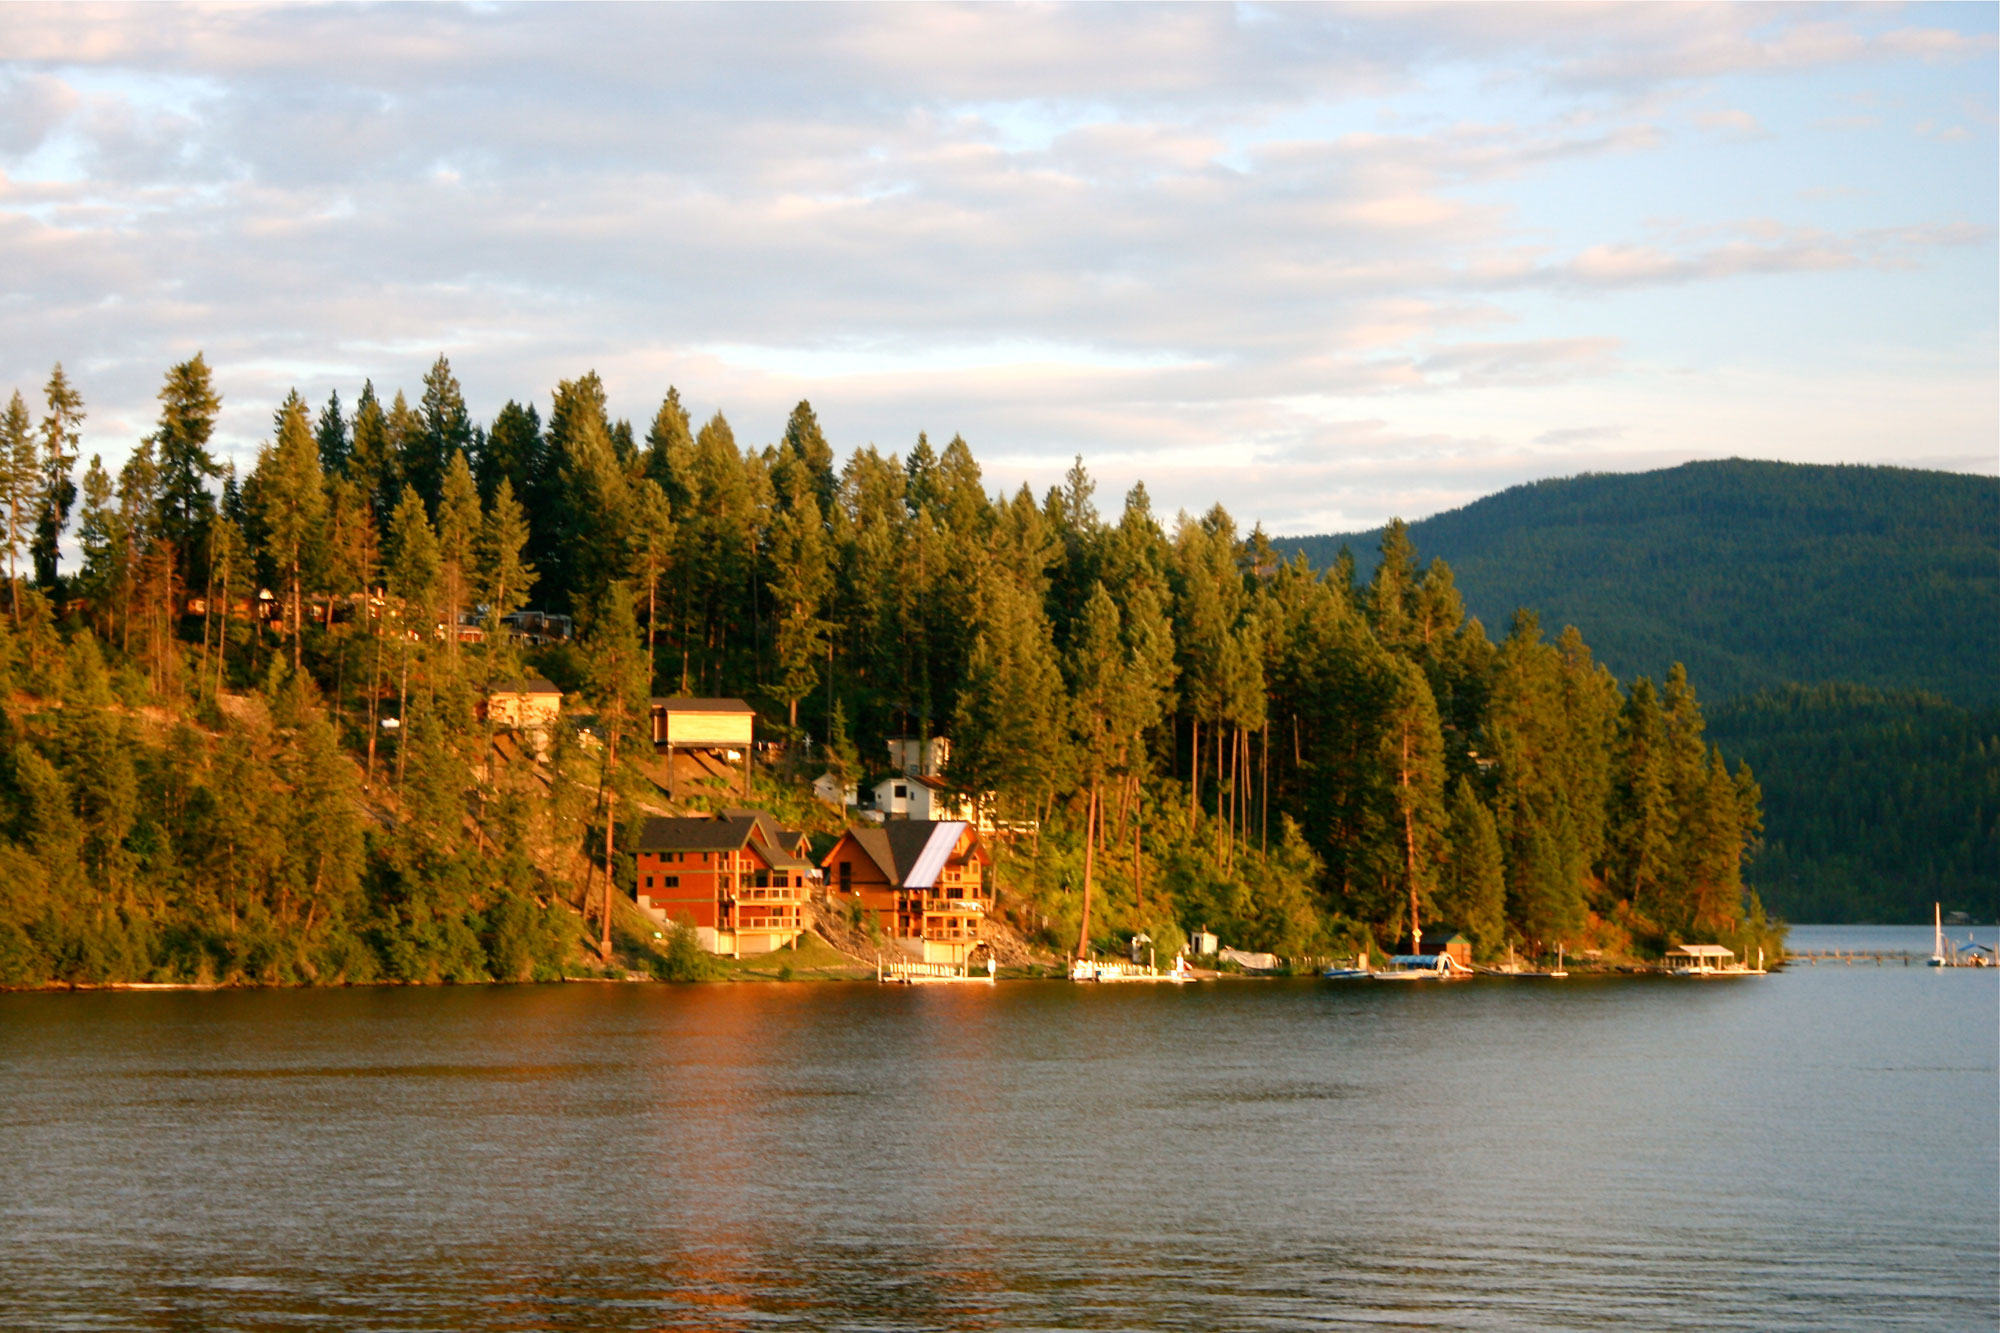 Photograph of Coeur d'Alene, Idaho. The photo shows a lake in the foreground with conifer-covered hills rising at its edges. Houses with docks and boats can be seen near the lakeshore in the middle ground of the image.